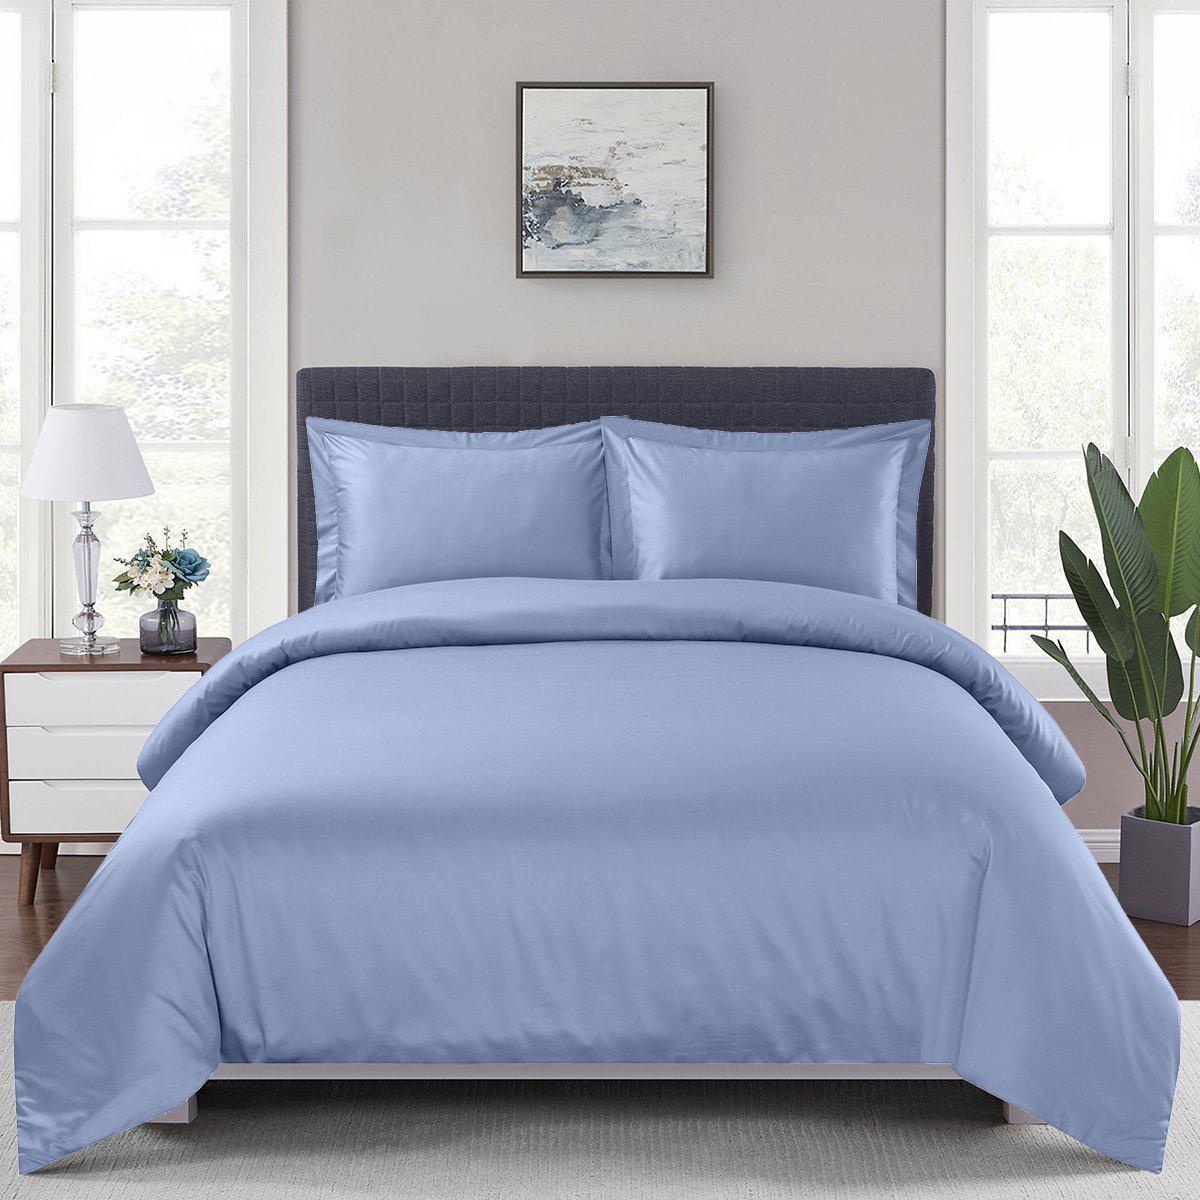 Royal Tradition 100 Percent Bamboo Bed Sheet Set, Full, Solid Periwinkle, S 